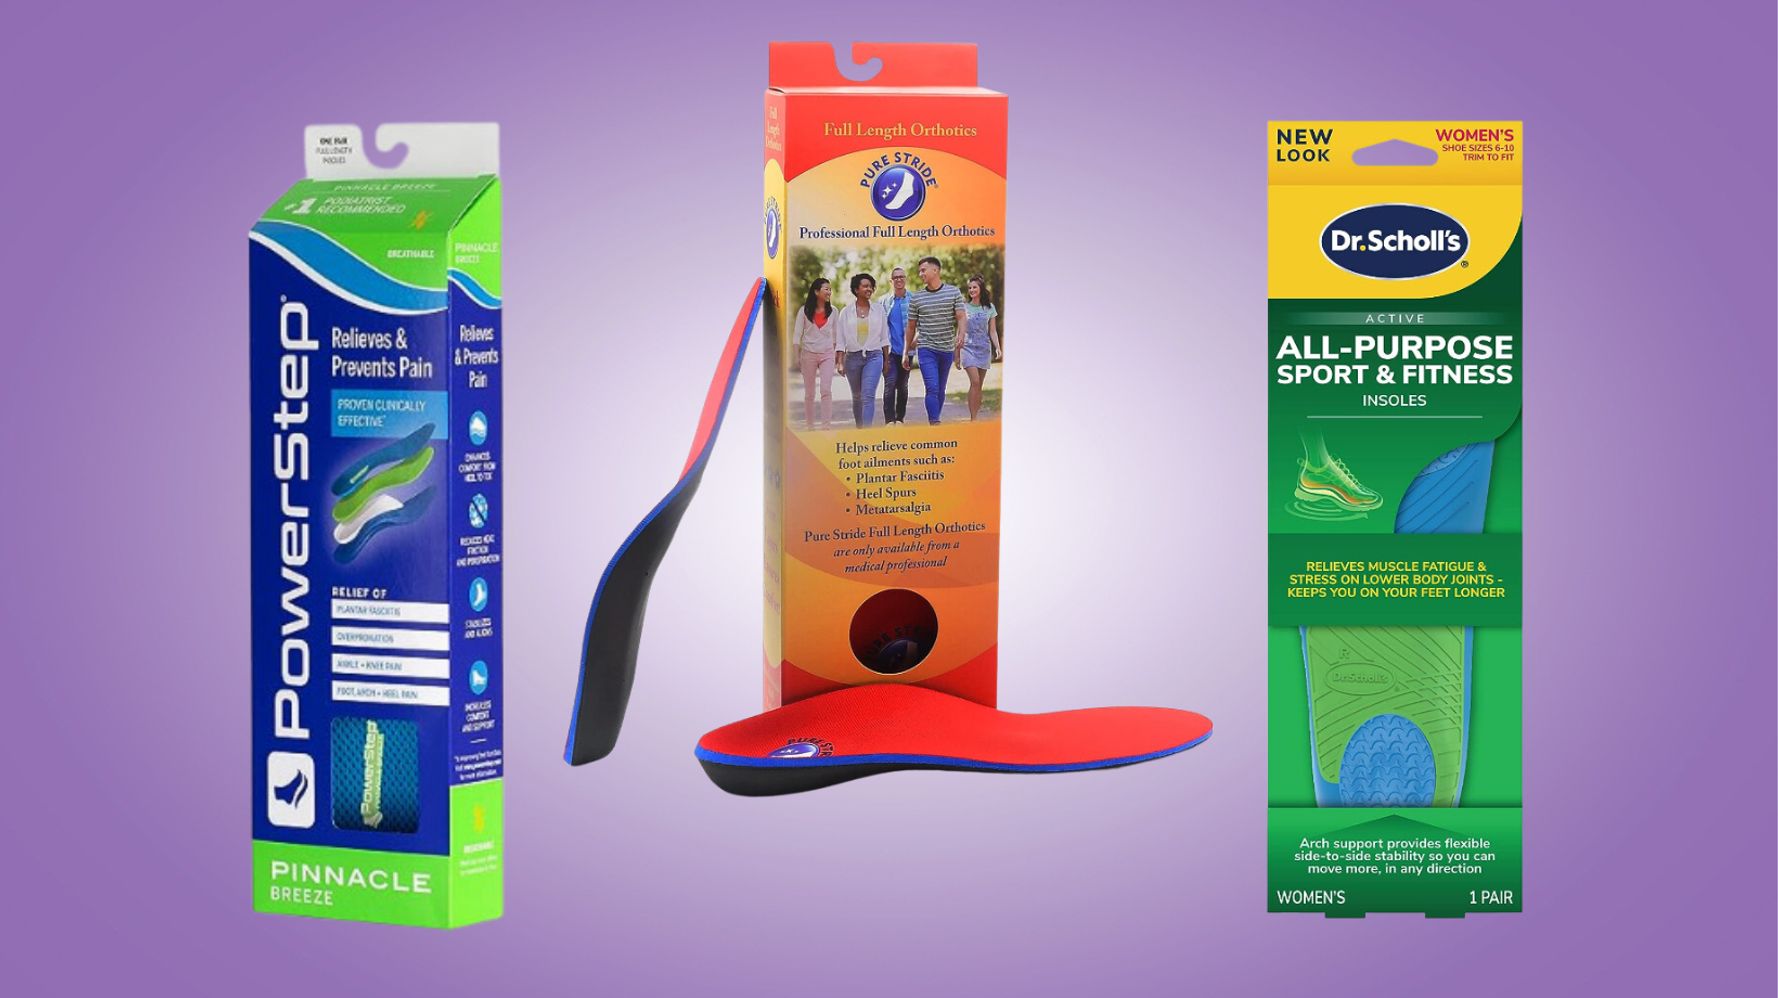 Best Shoe Inserts for Plantar Fasciitis: A Review of Insoles